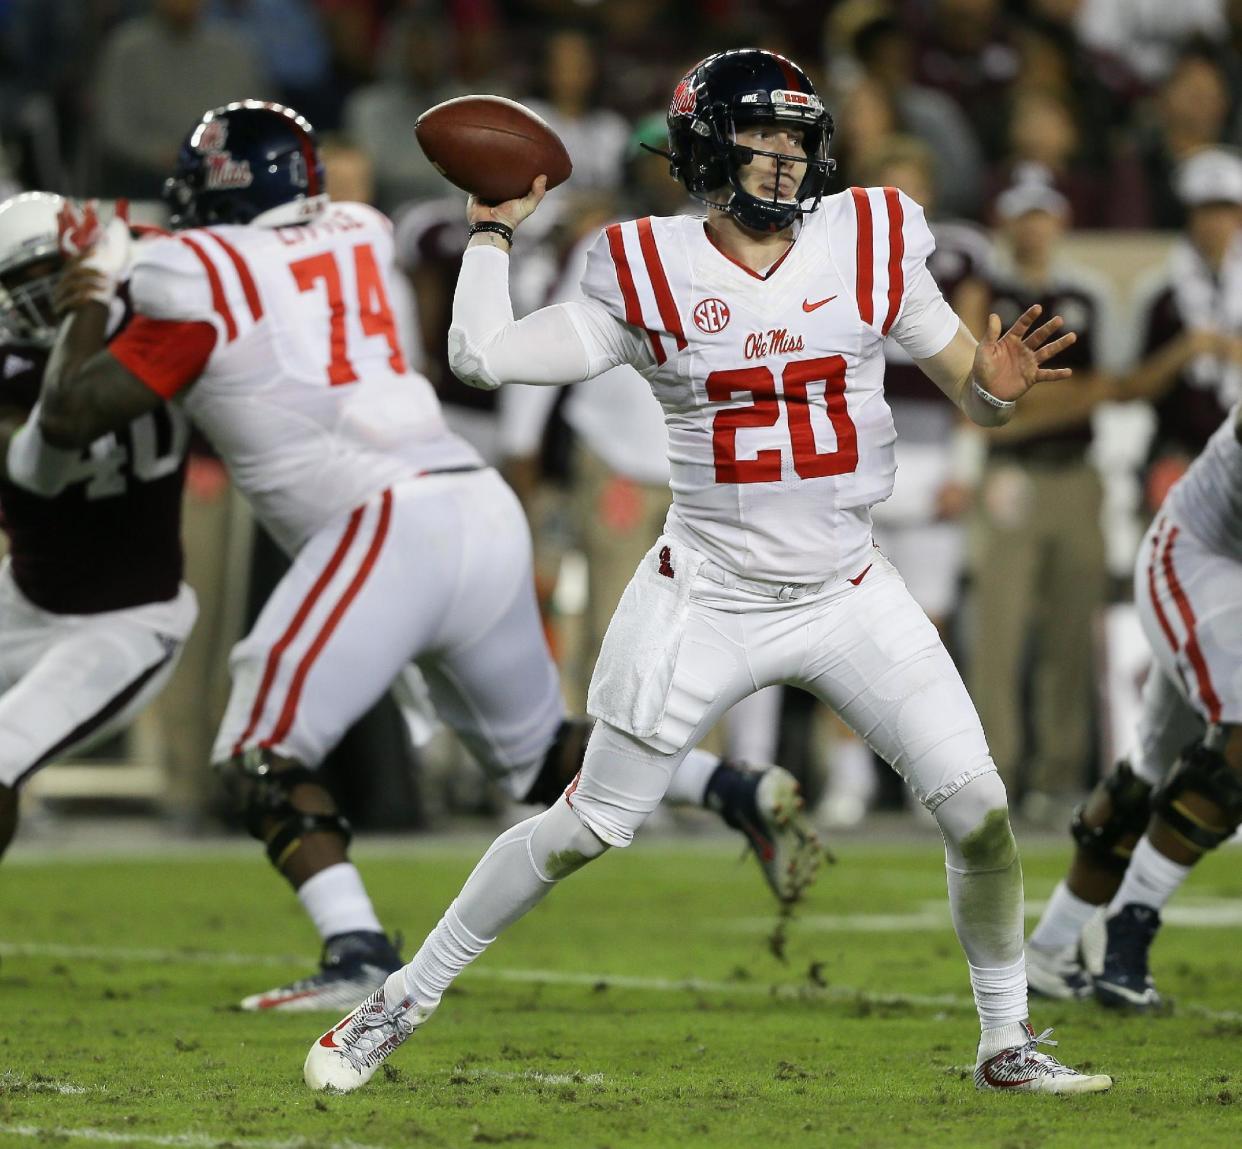 Shea Patterson is transferring to Michigan. (Photo by Bob Levey/Getty Images)